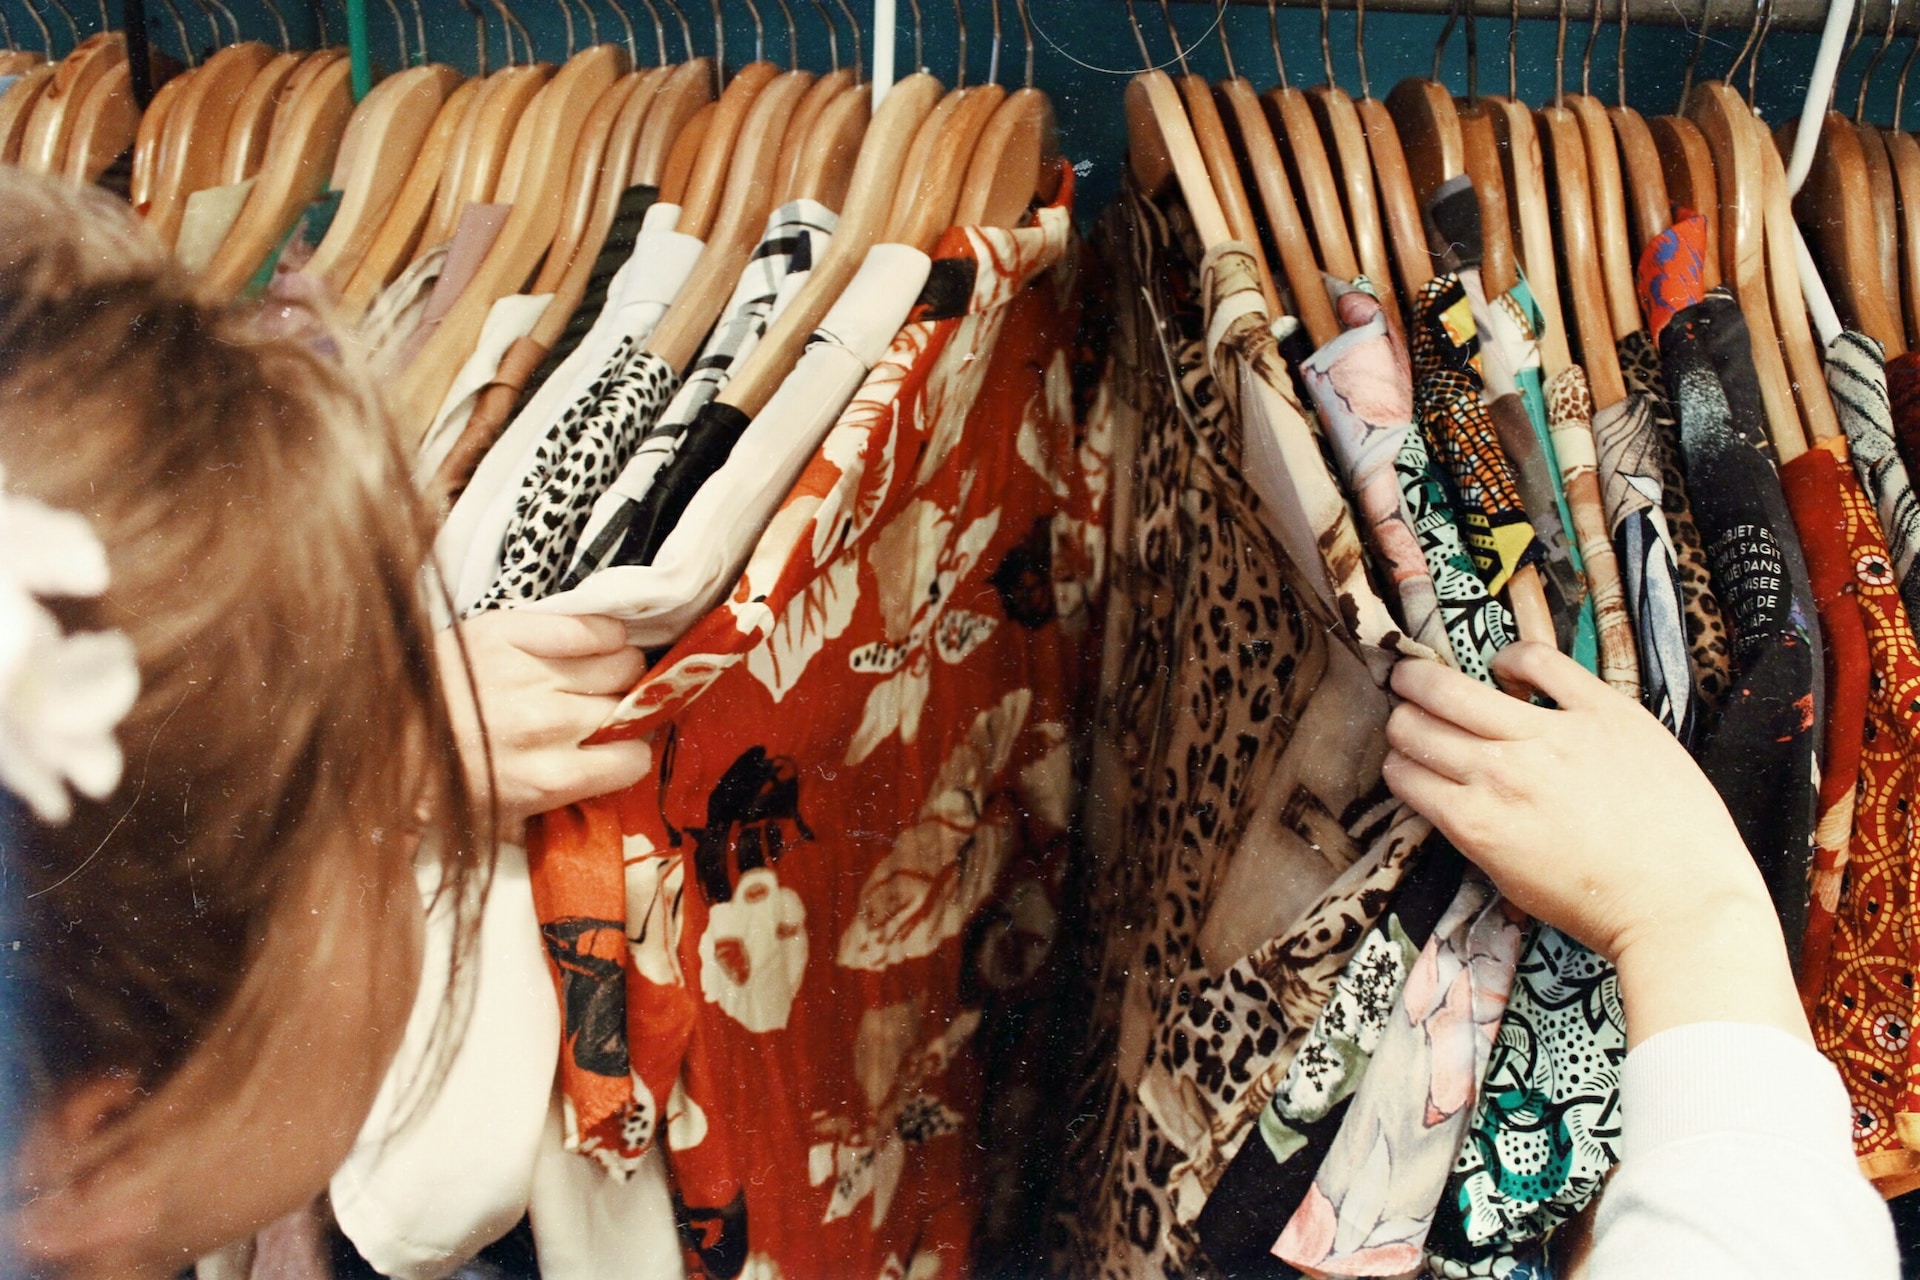 Reasons Why You Should Give Second-Hand Shopping a Try